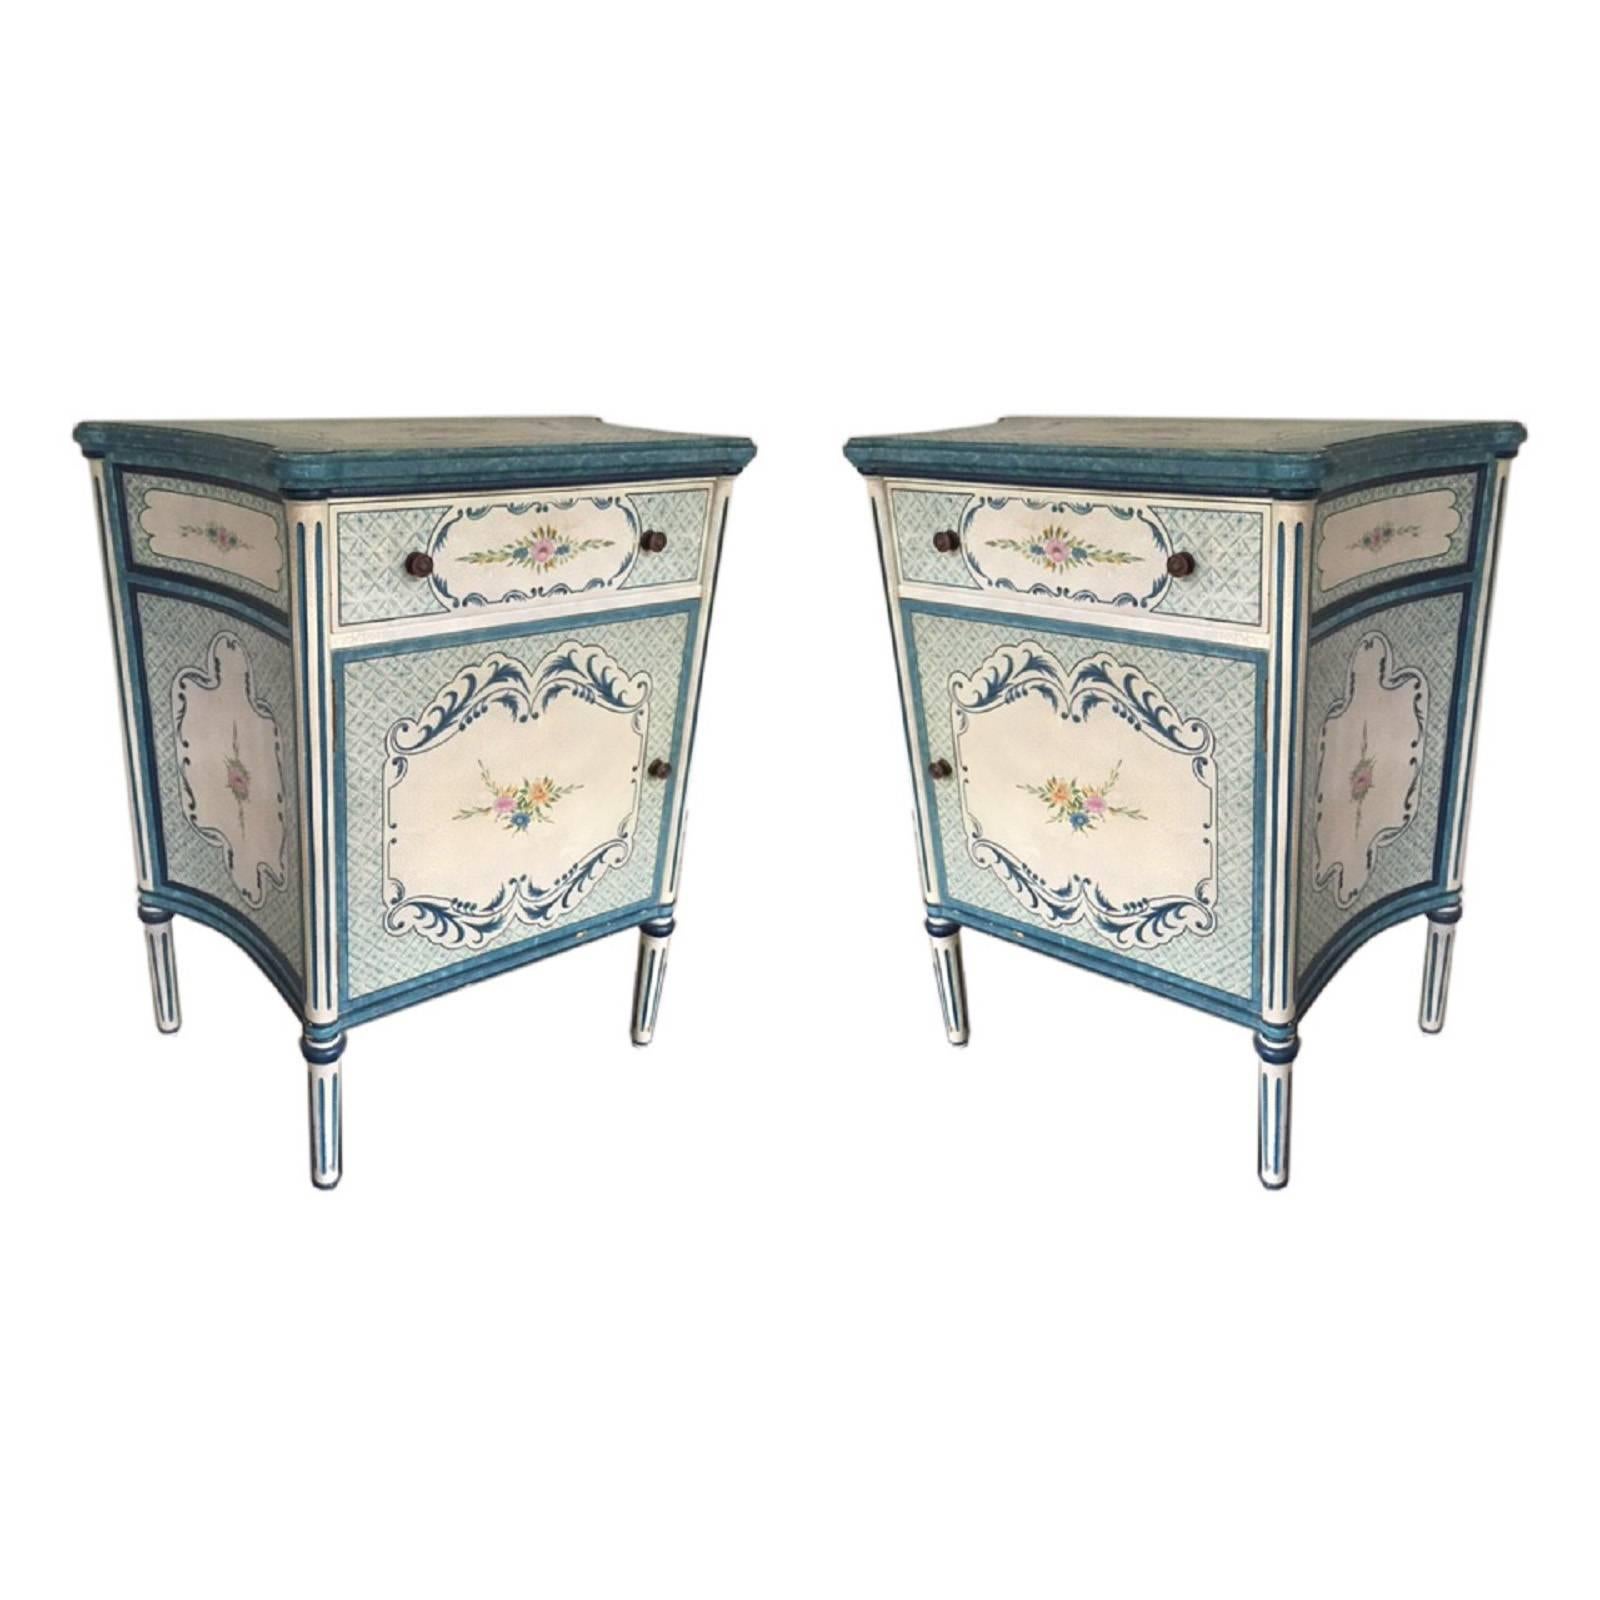 Pair of French Provincial Style Hand-Painted Side Table Commodes